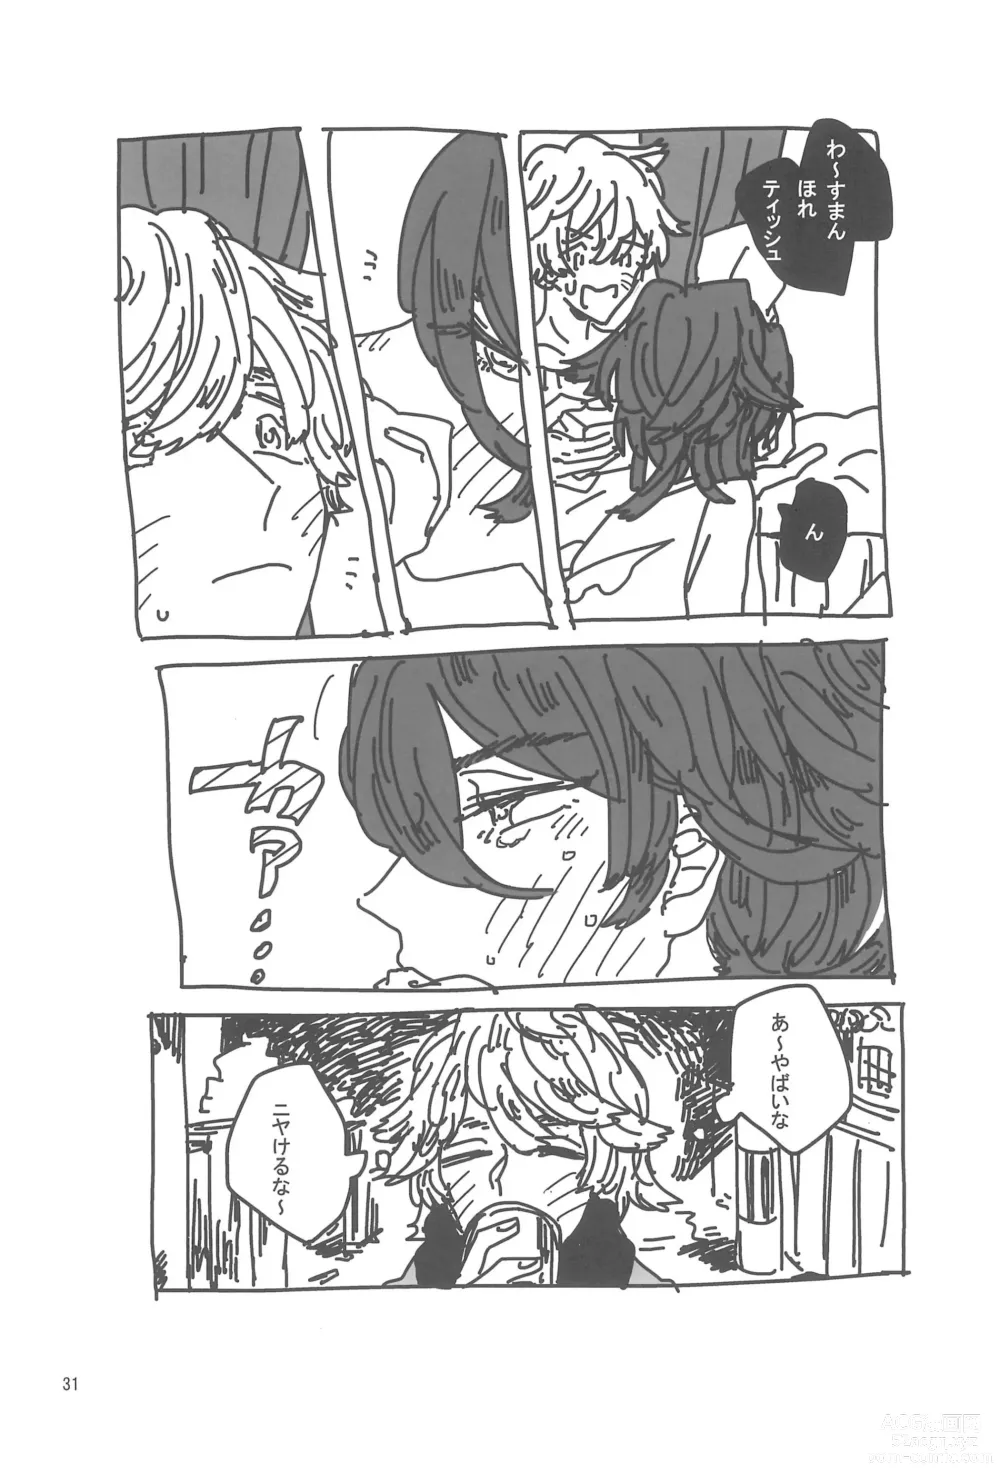 Page 33 of doujinshi ANDTHERE WAS EVENING AND THERE WAS MORNING The forth day